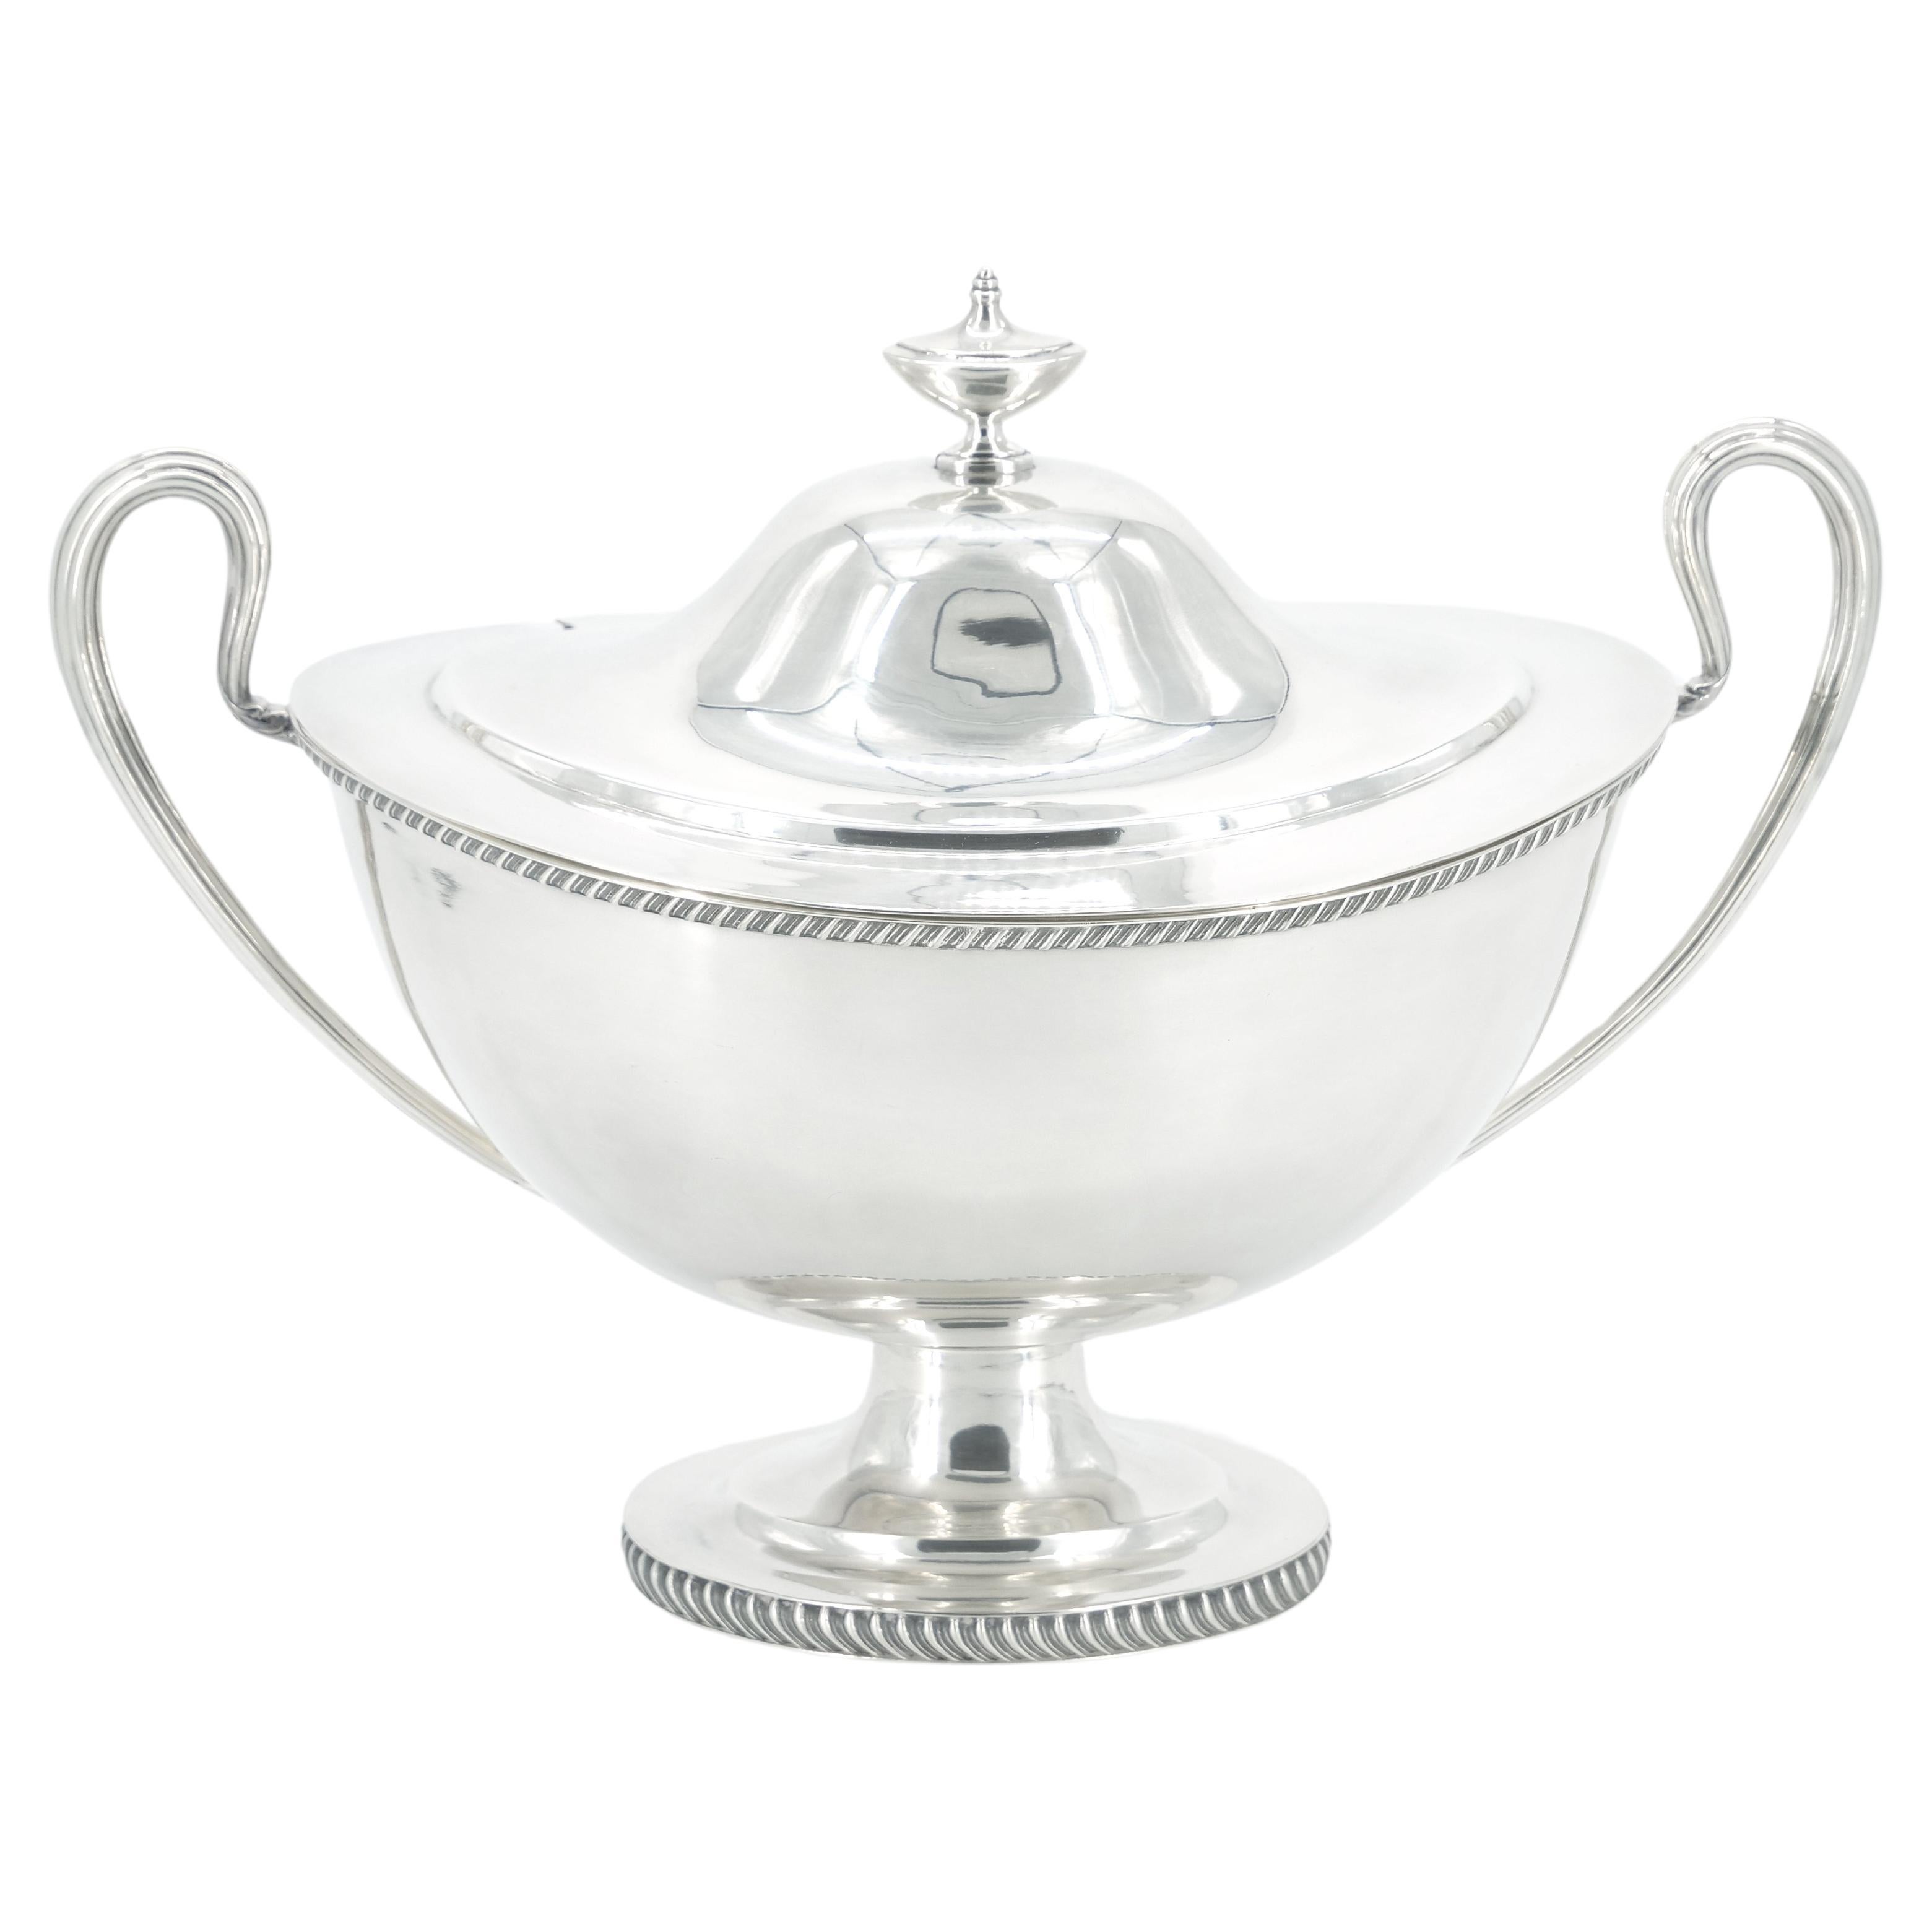 Large English Silver Plate Tableware Covered Tureen For Sale